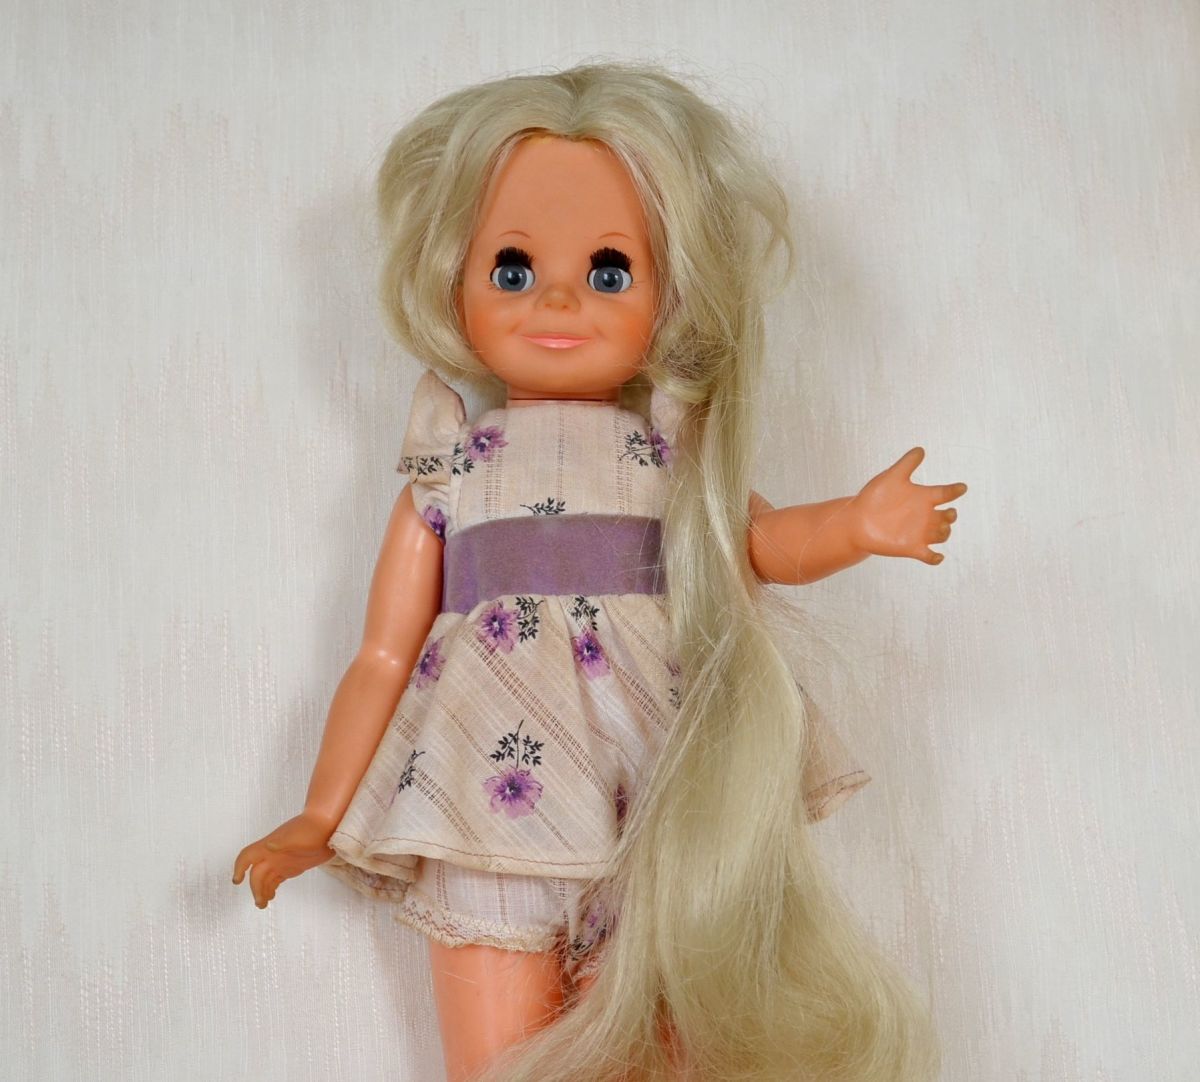 My Vintage Doll Collection From the 1960s and 1970s - HobbyLark